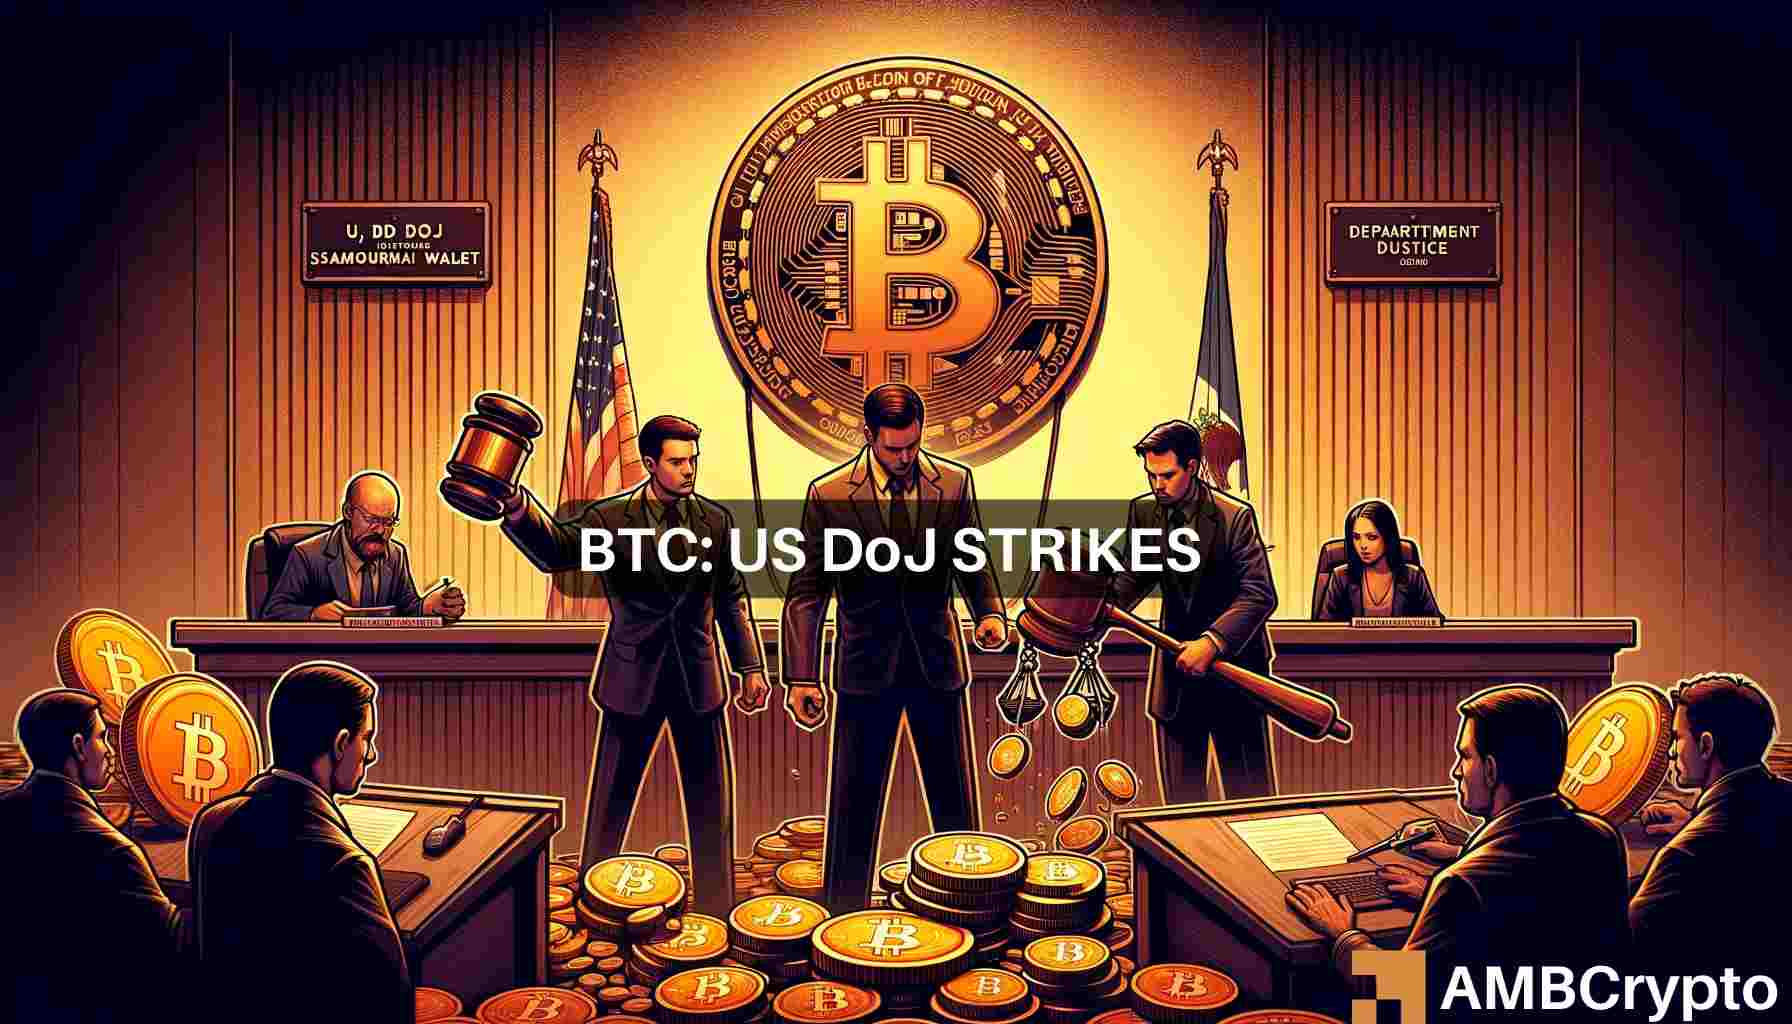 Bitcoin affected as U.S. DoJ charges Samourai Wallet founders – Why?